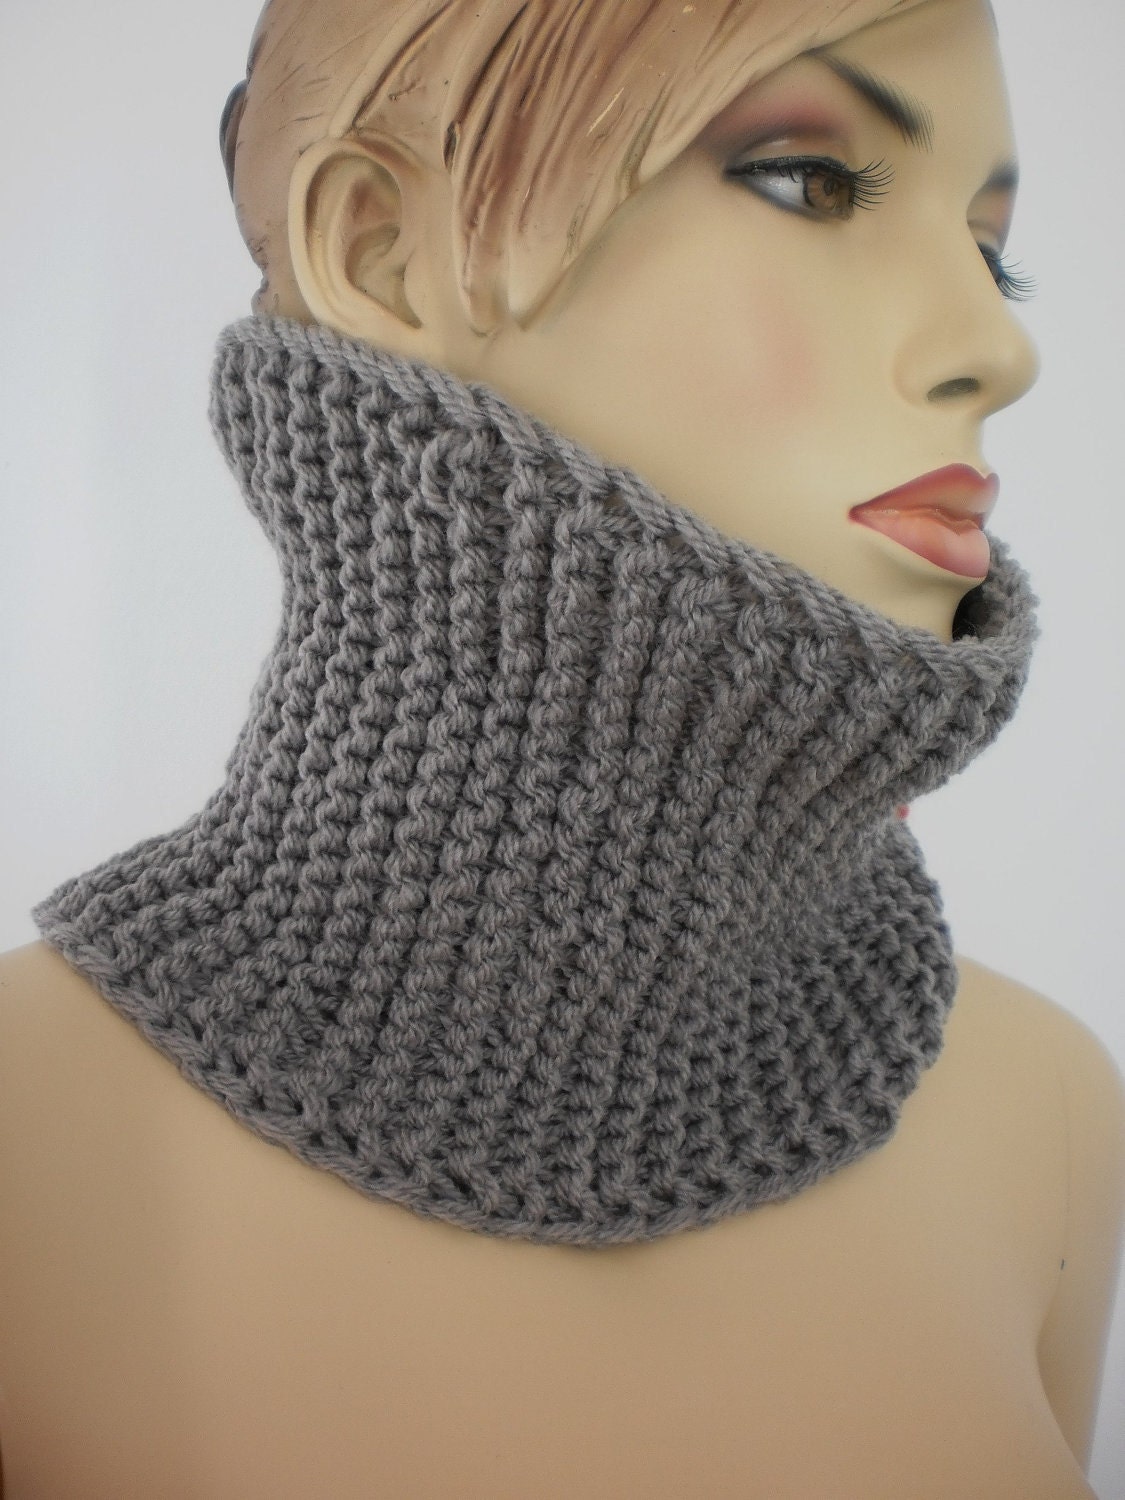 Fall Fashion Hand Knit Cowl Scarf Neck Warmer by levintovich